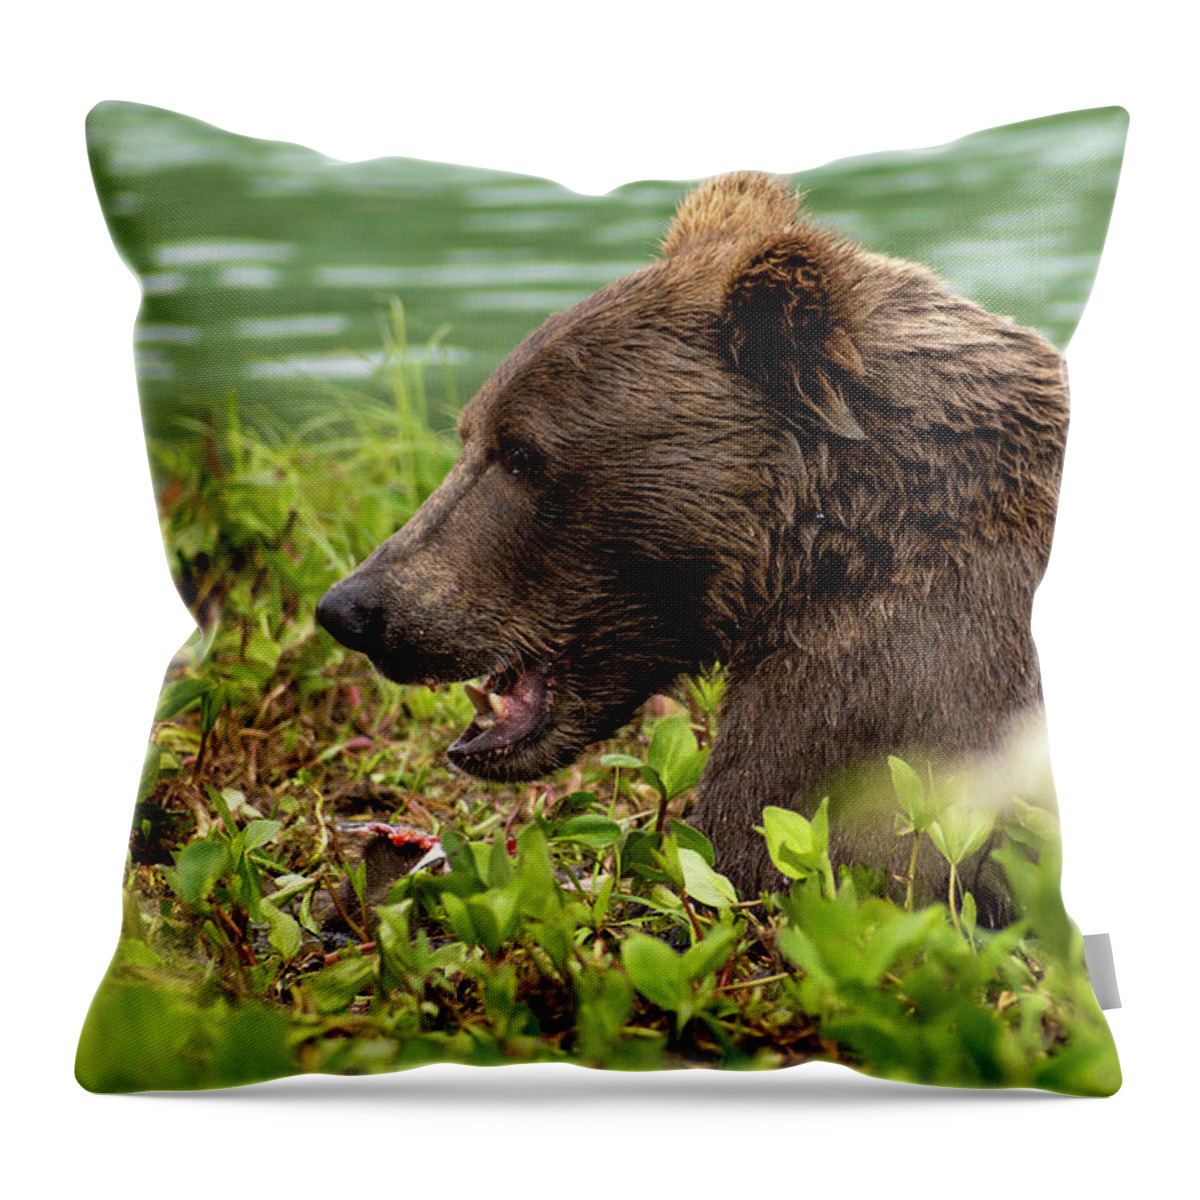 Hungry Throw Pillow featuring the photograph Hungry Bear by Chad Dutson